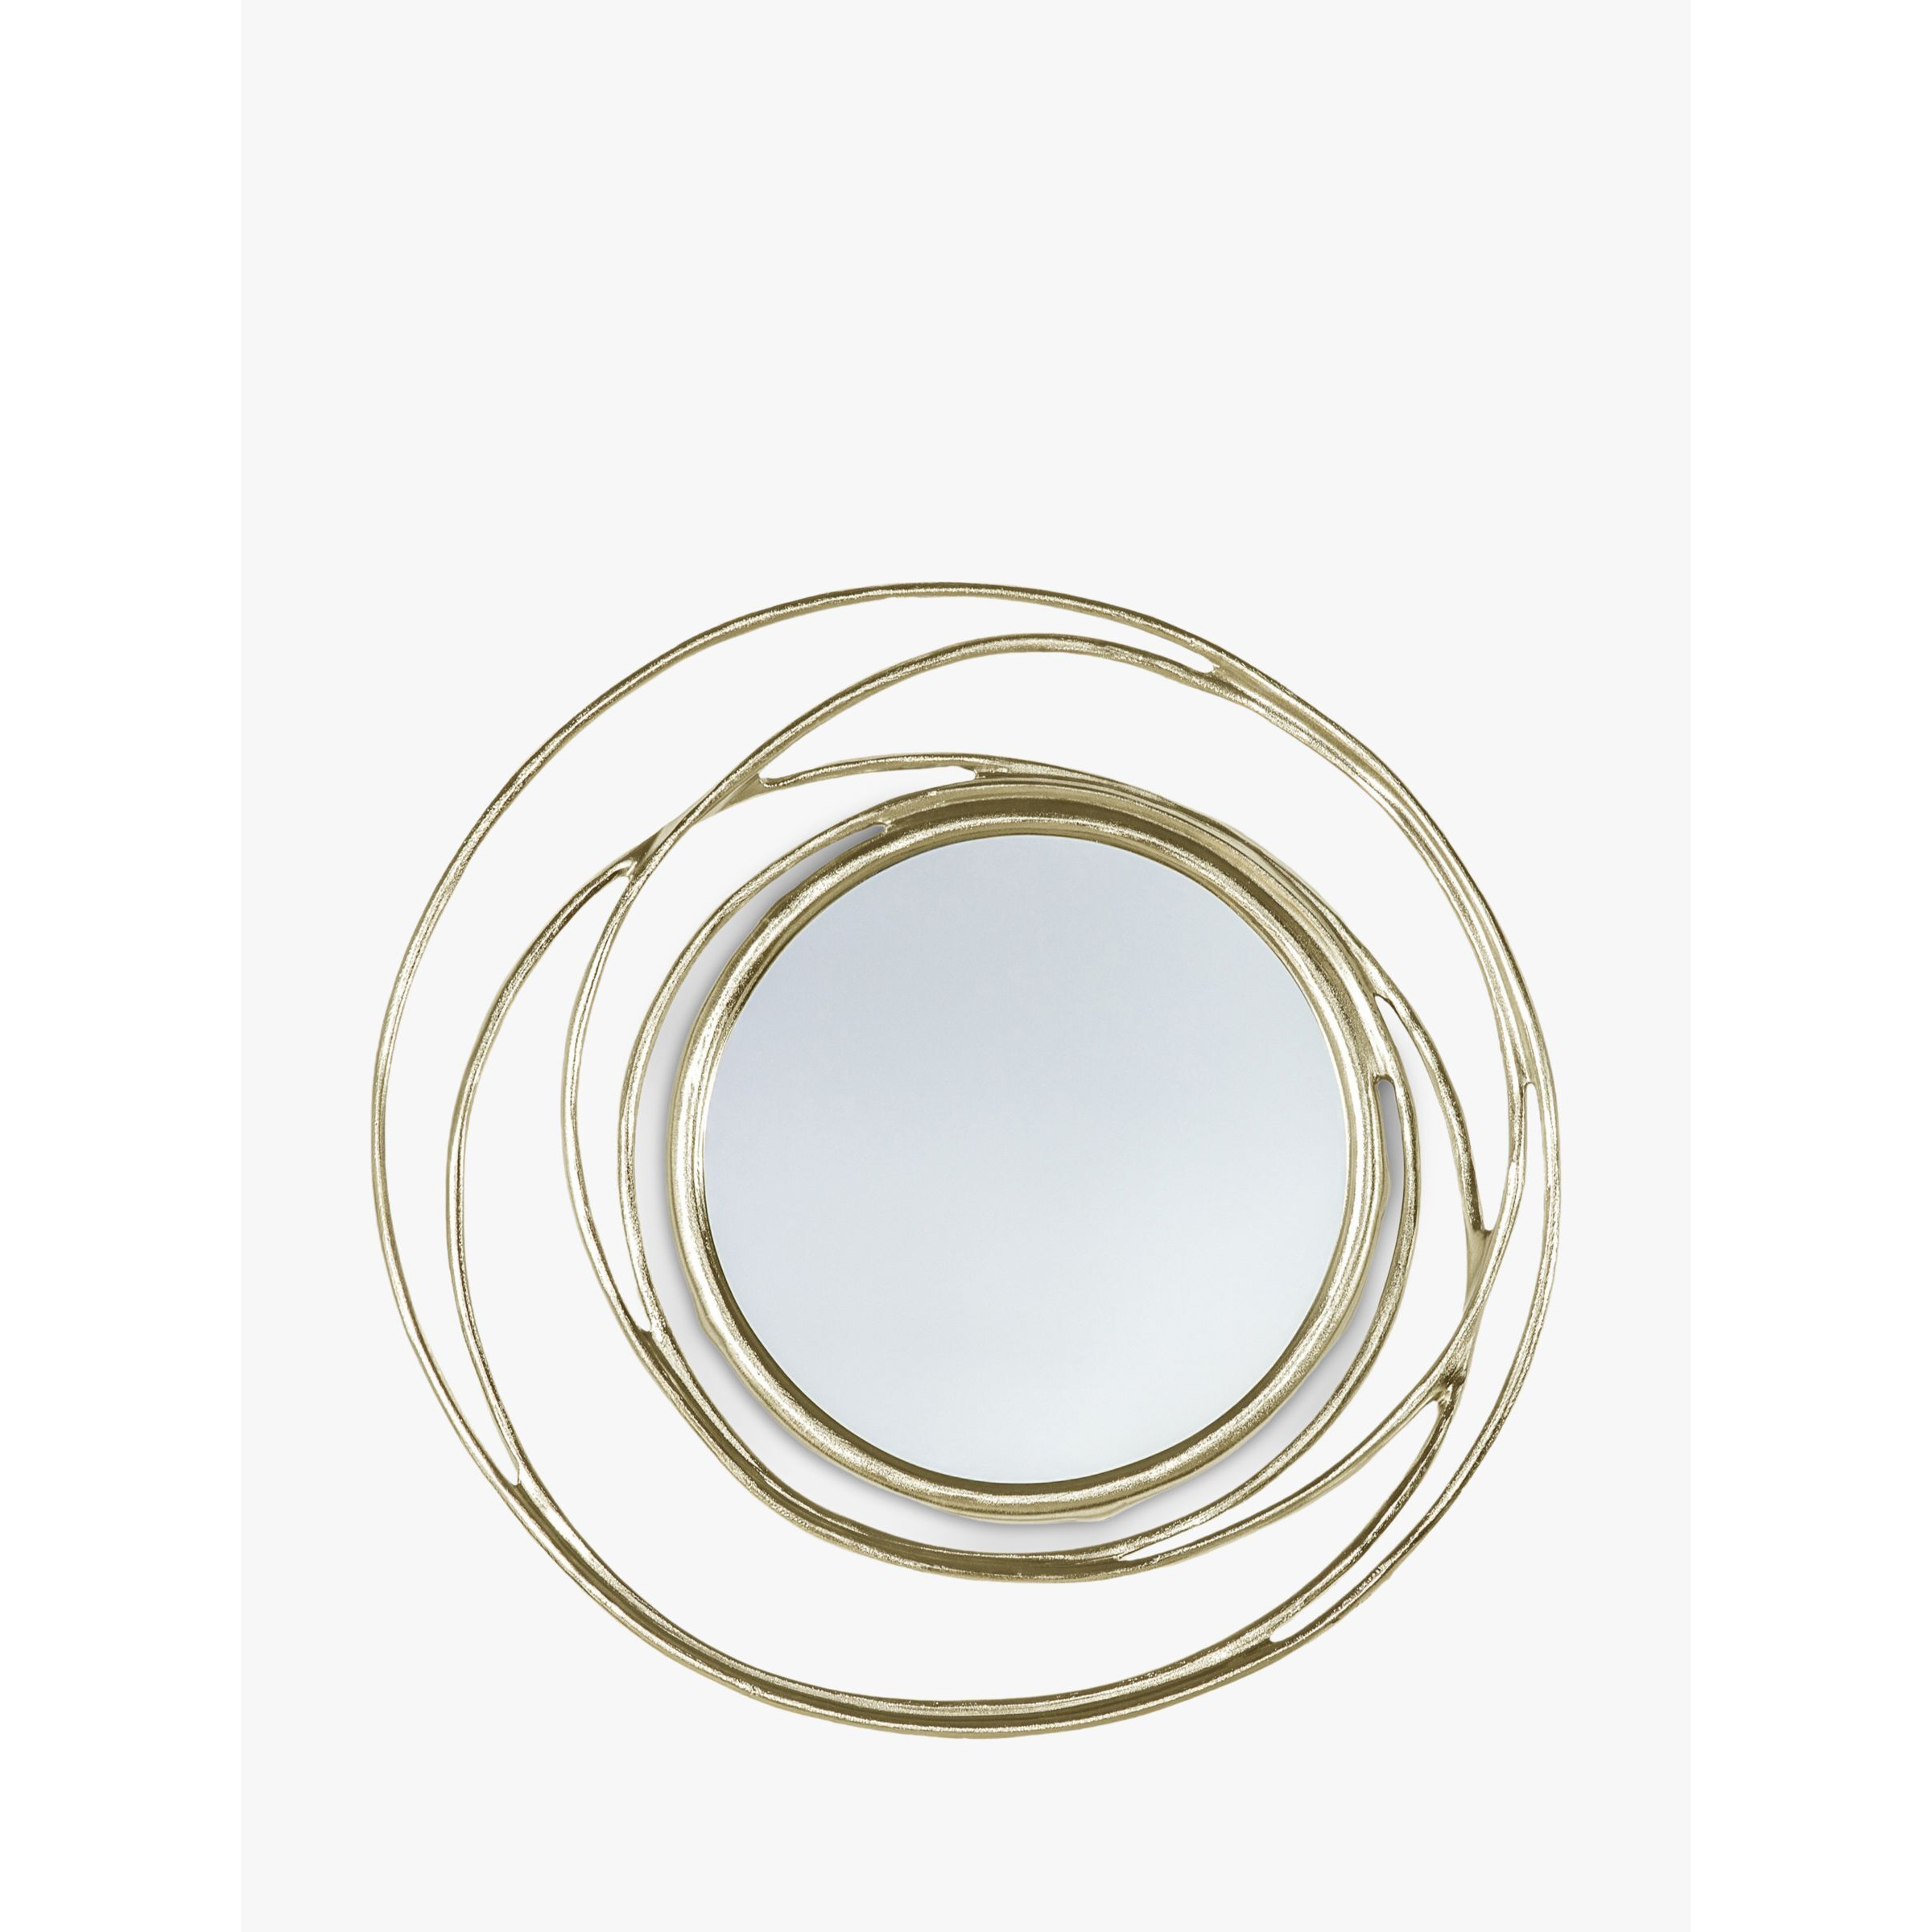 Gallery Direct Harrison Round Metal Frame Wall Mirror, 66cm - image 1